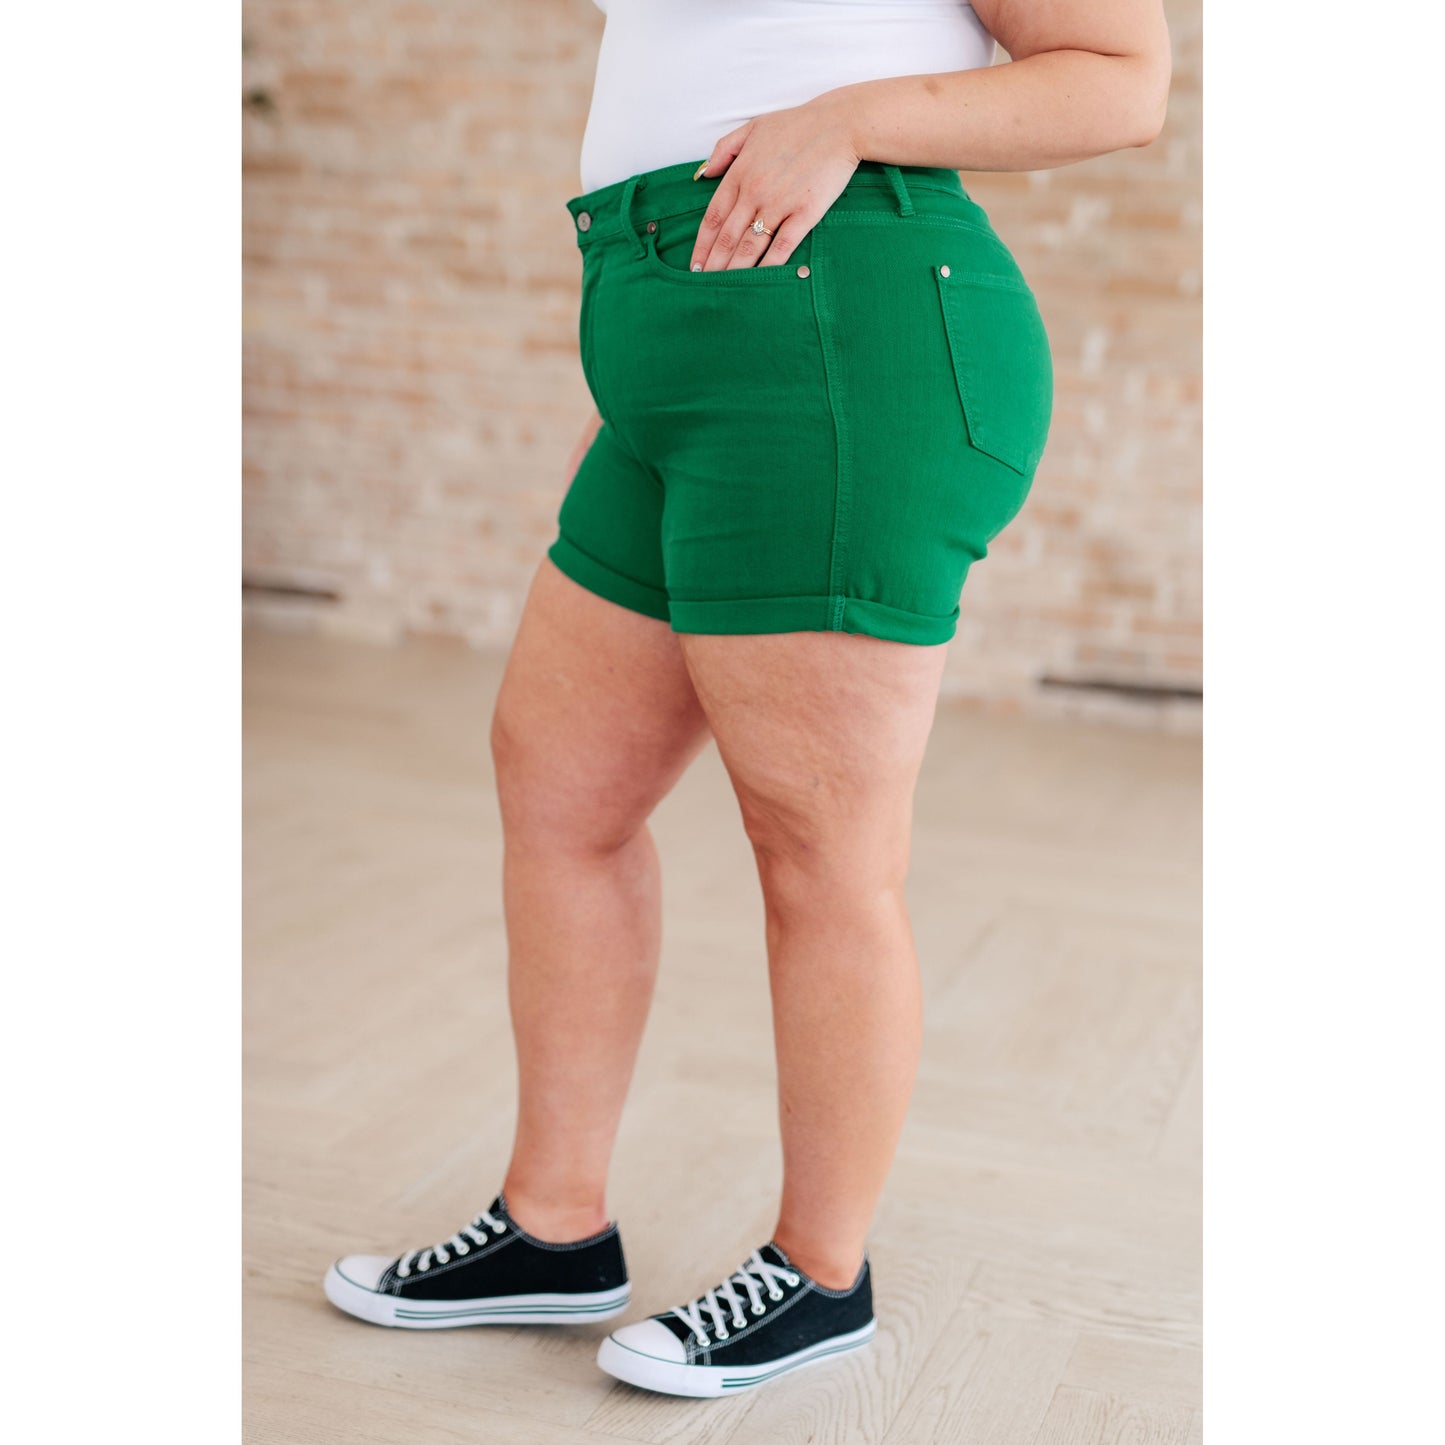 Judy Blue High Rise Control Top Cuffed Shorts in Green - Rhapsody and Renascence